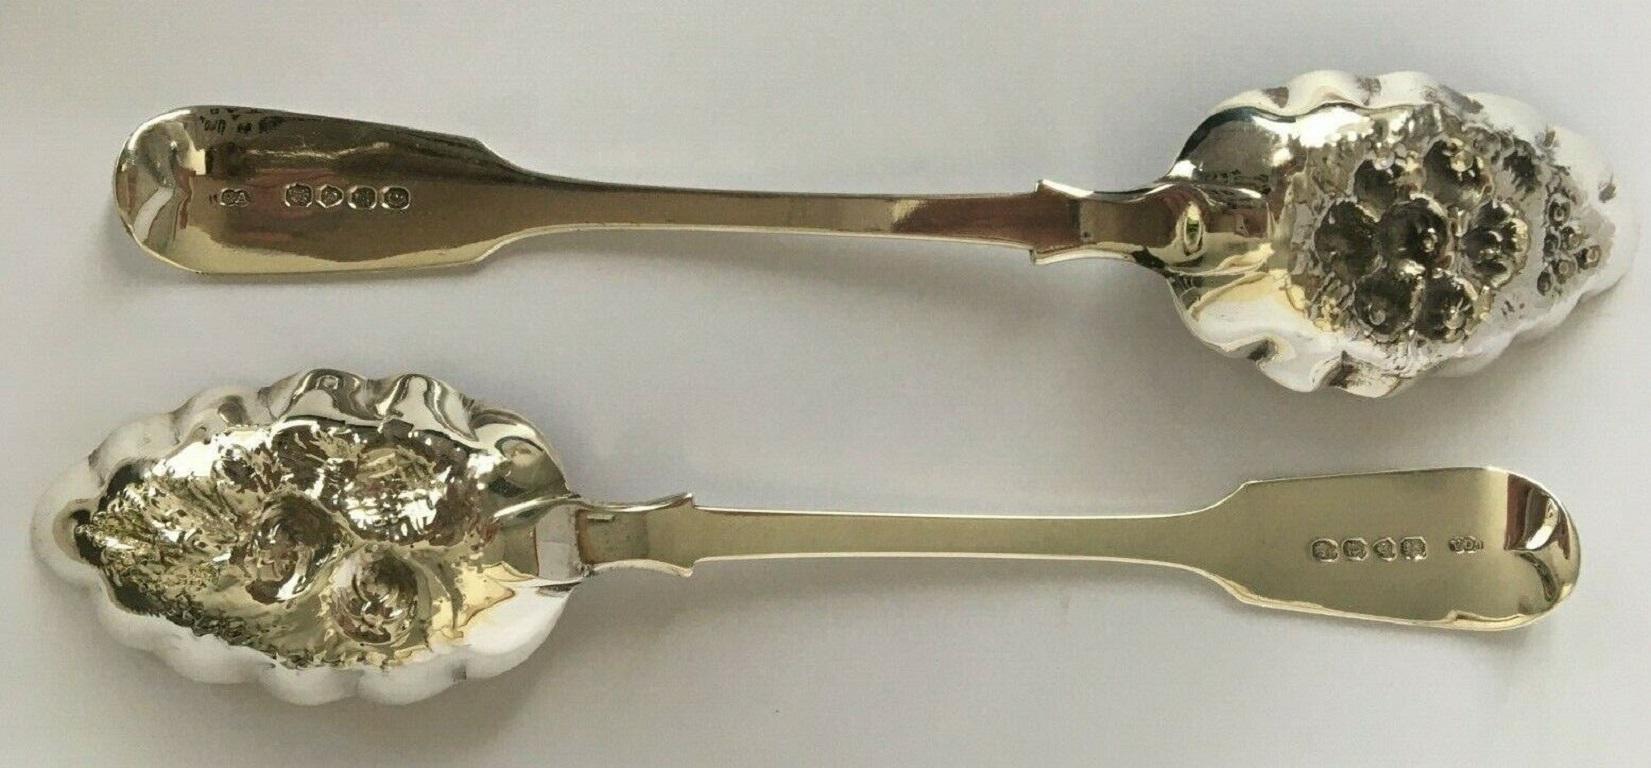 Pair of Victorian Sterling Silver Berry Fruit Serving Spoons from 1848

In excellent condition, this superb set features brilliantly crafted and gilded bowls with floral motifs. These spoons have a gilt finish to the bowls. The gilding is still